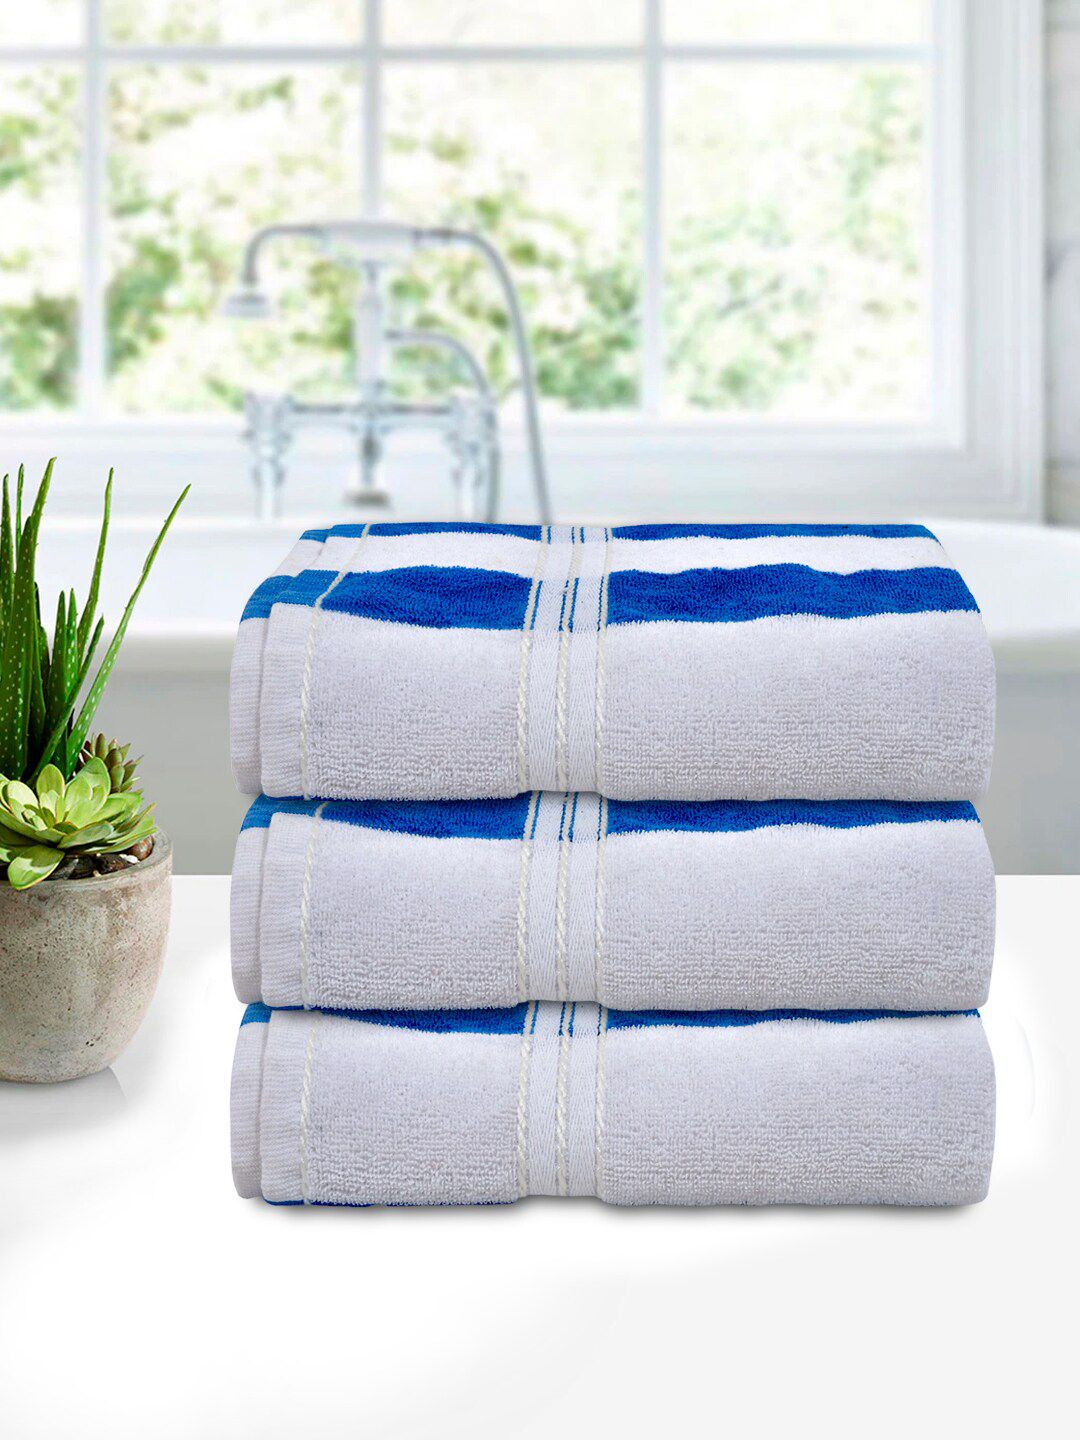 Kuber Industries Set of 3 Blue & White Cotton Bath Towels Price in India